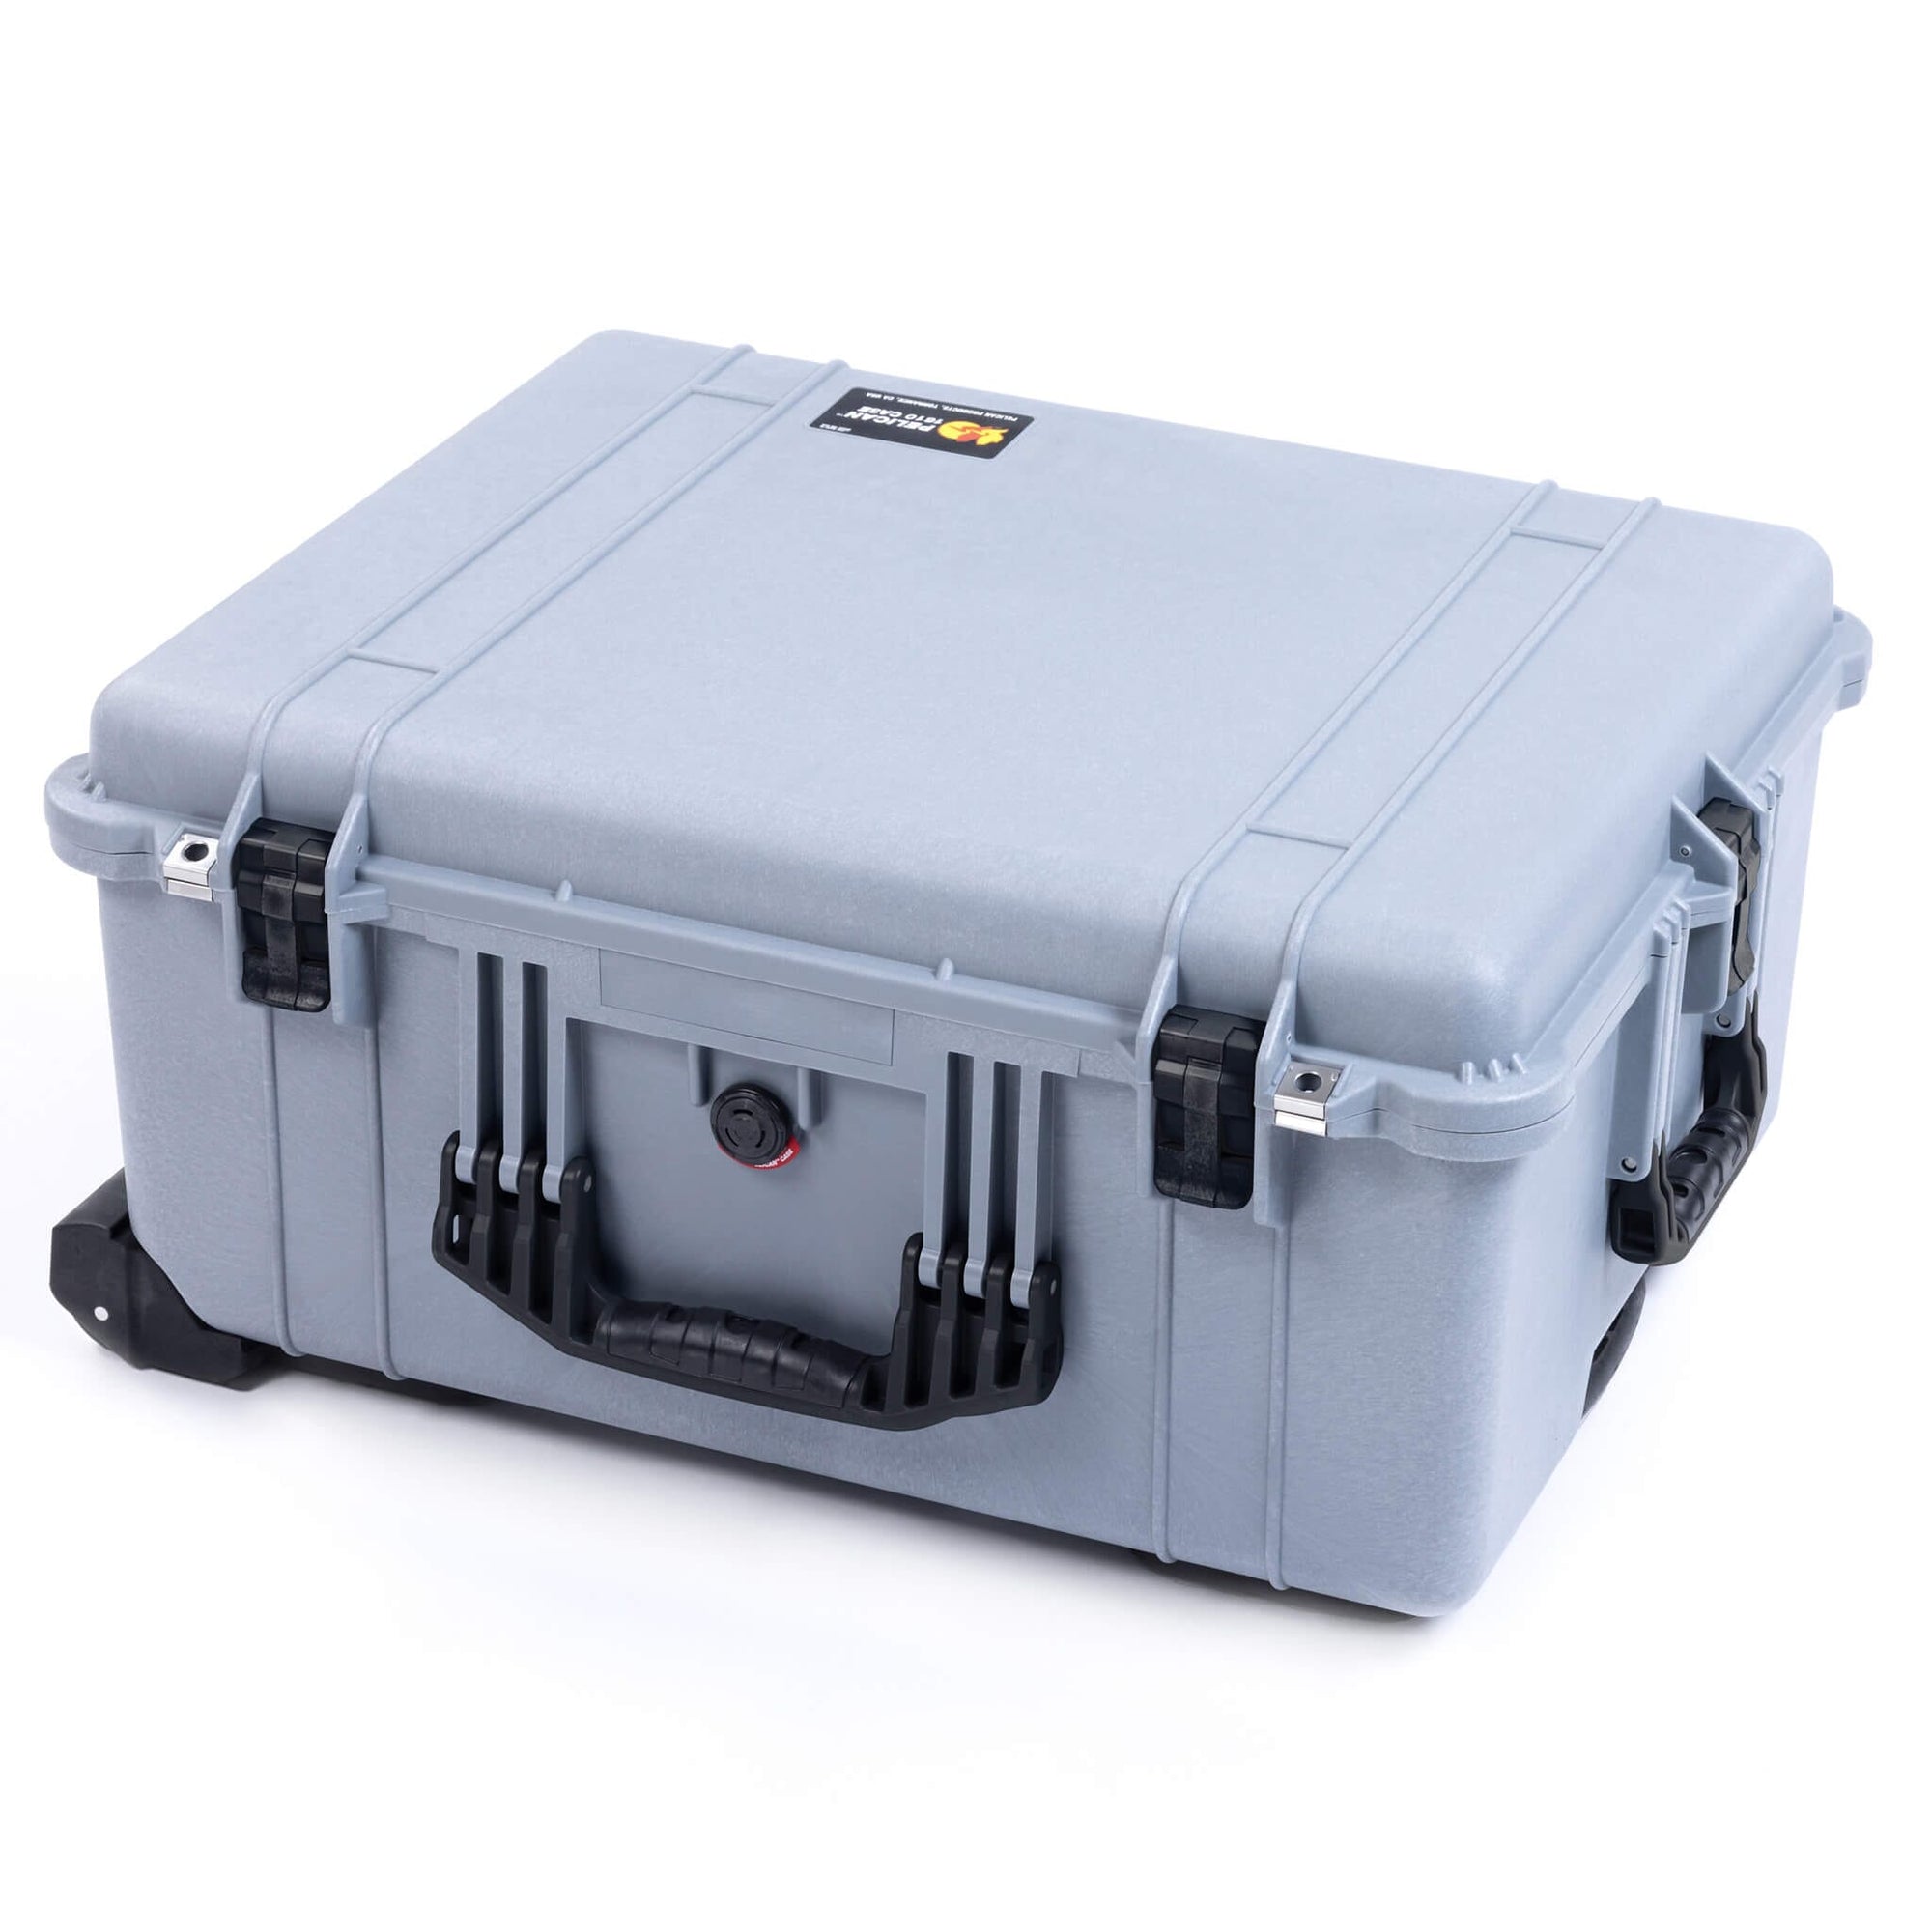 Pelican 1610 Case, Silver with Black Handles and Latches ColorCase 